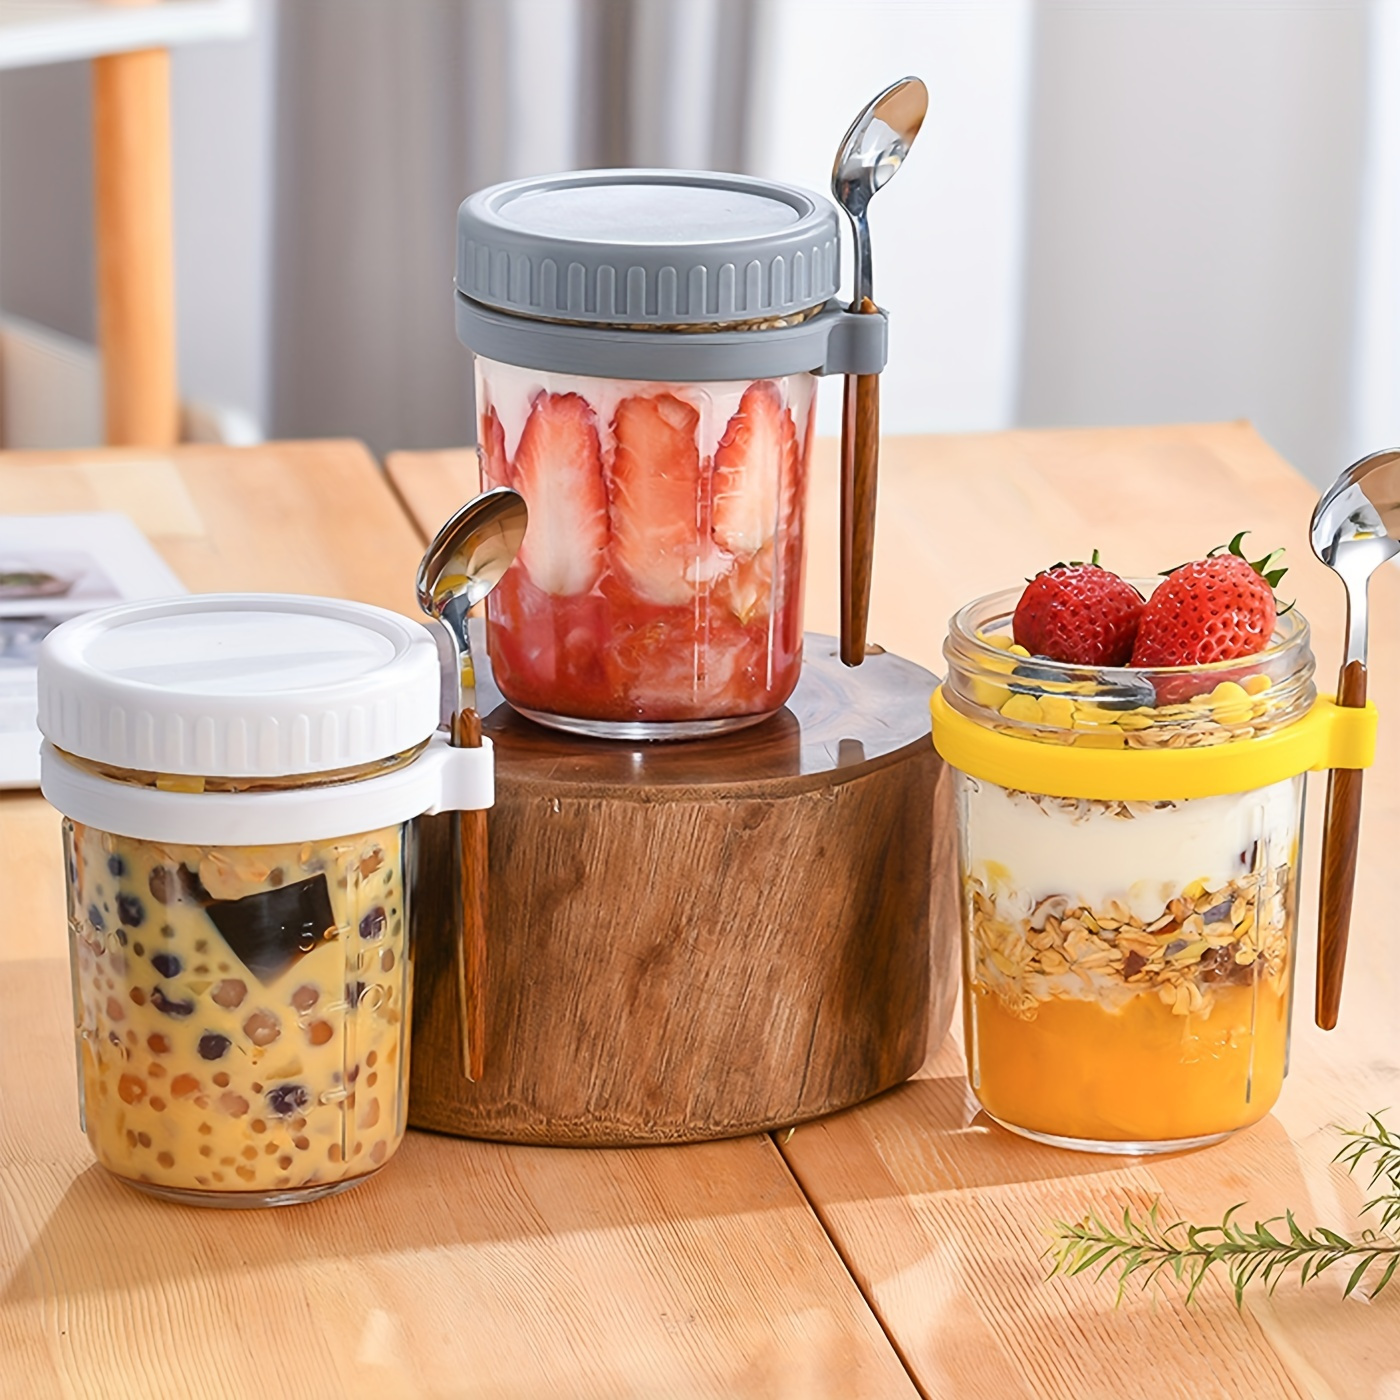 2Pcs 16oz Overnight Oats Container Airtight Glass Oatmeal Jars with Lid and  Spoon Portable Overnight Oatmeal Cup Reusable Wide Mouth Breakfast Cup  Container for Salads Milk Cereal Fruit Gray 